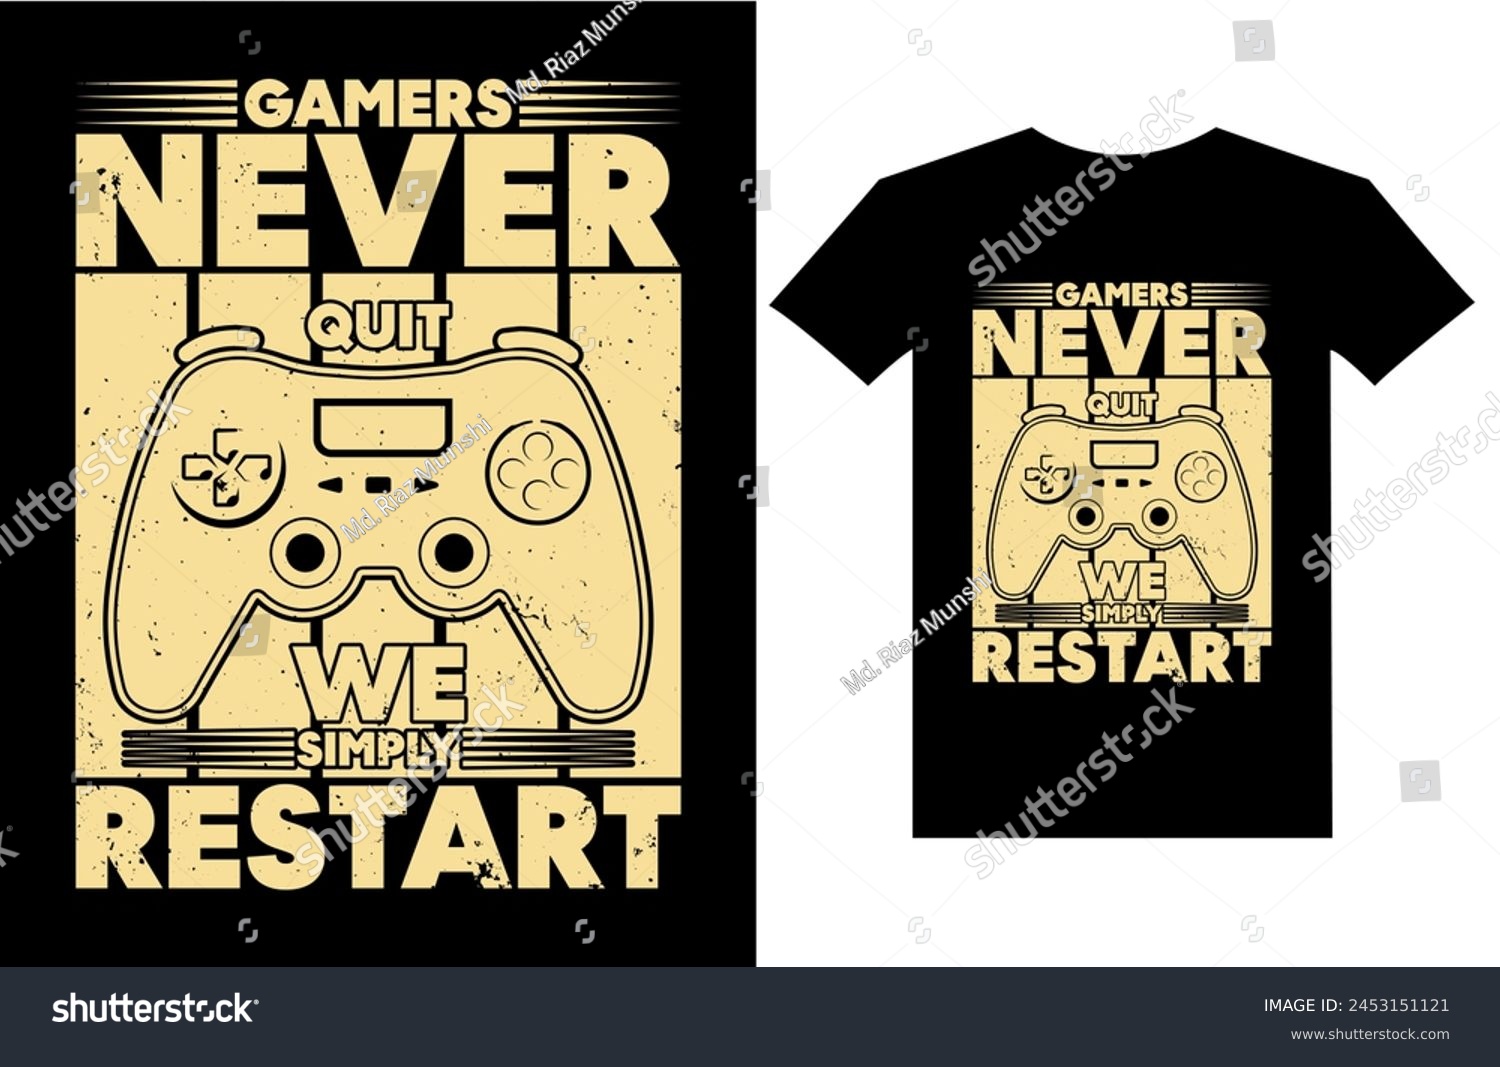 SVG of Gamers Never Quit We Simply Restart. Gaming Gamer t shirts design, Vector graphic, typographic poster or t-shirt svg